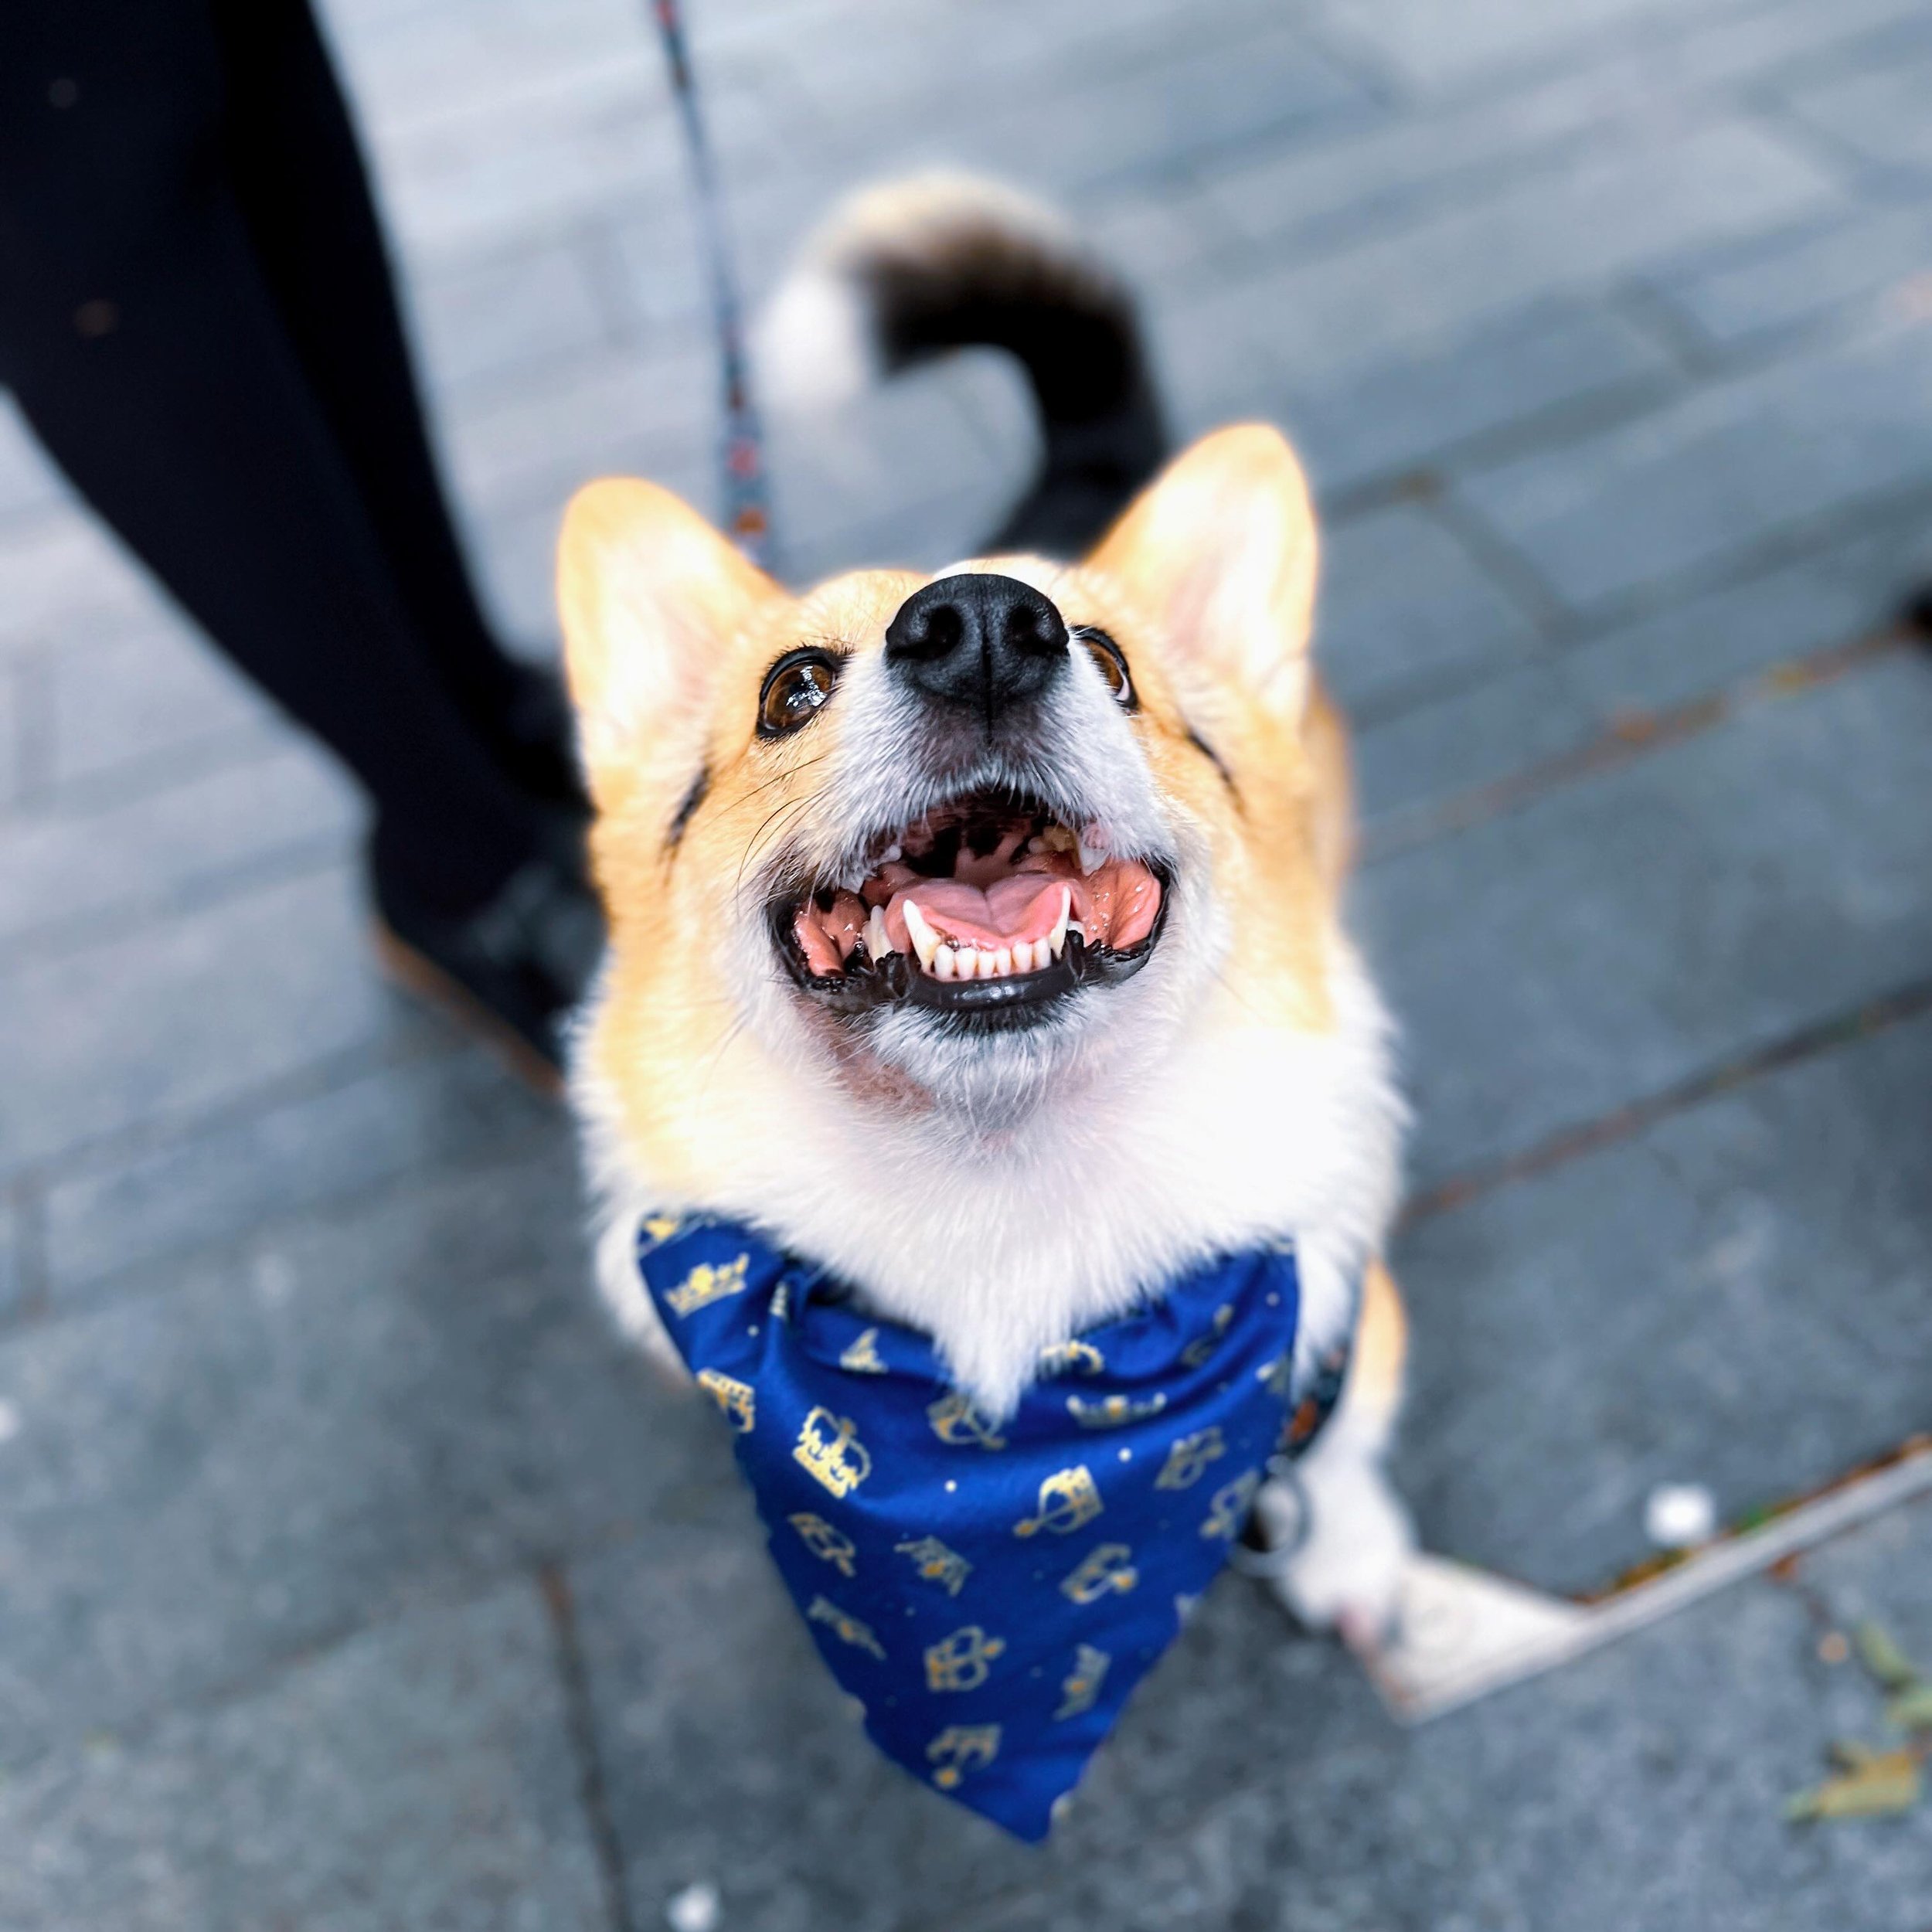 Meet Luna, the wise old lady in a Corgi suit! 🐾

Can you believe she&rsquo;s been gracing our lives with her wisdom and charm for 4 whole years now? Time truly does fly when you&rsquo;re in the company of such a regal furball. Here&rsquo;s to many m